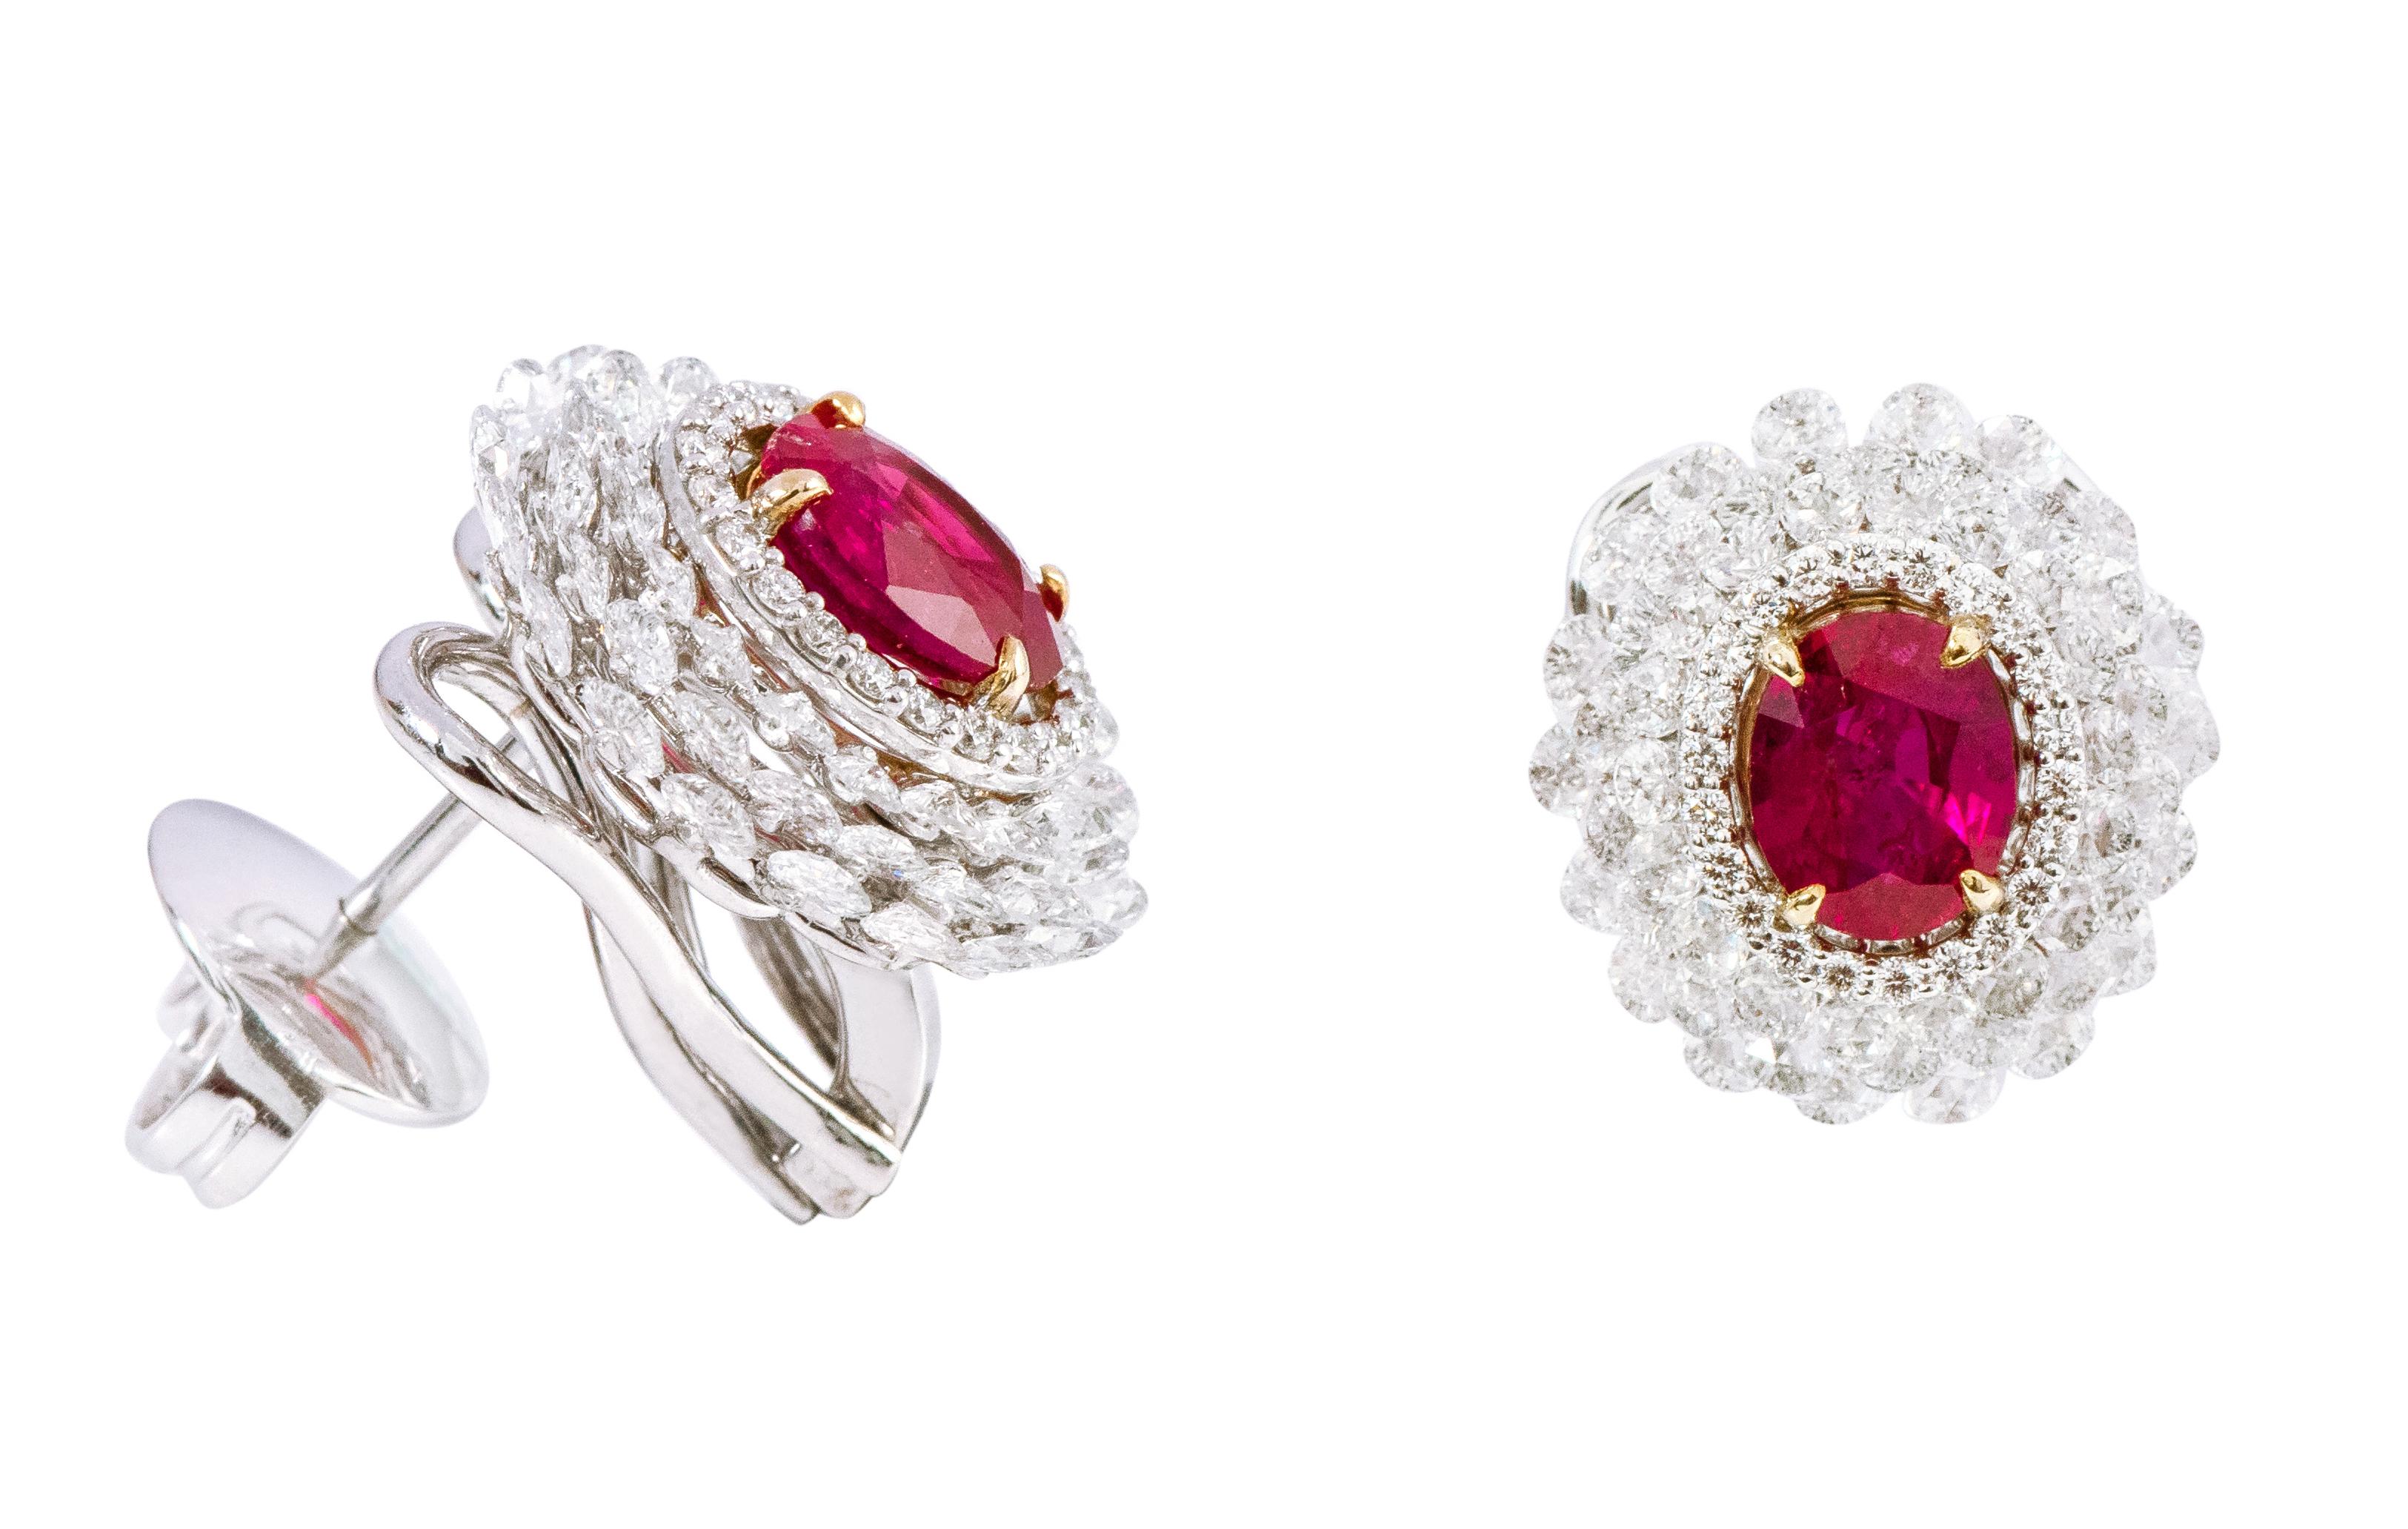 18 Karat White Gold 6.27 Carats Ruby and Diamond Cluster Stud Earrings 

This impeccable crimson red ruby and diamond rose-cut earring is remarkable. The earring sets itself apart with the exquisite solitaire oval ruby surrounded by a thin layer of